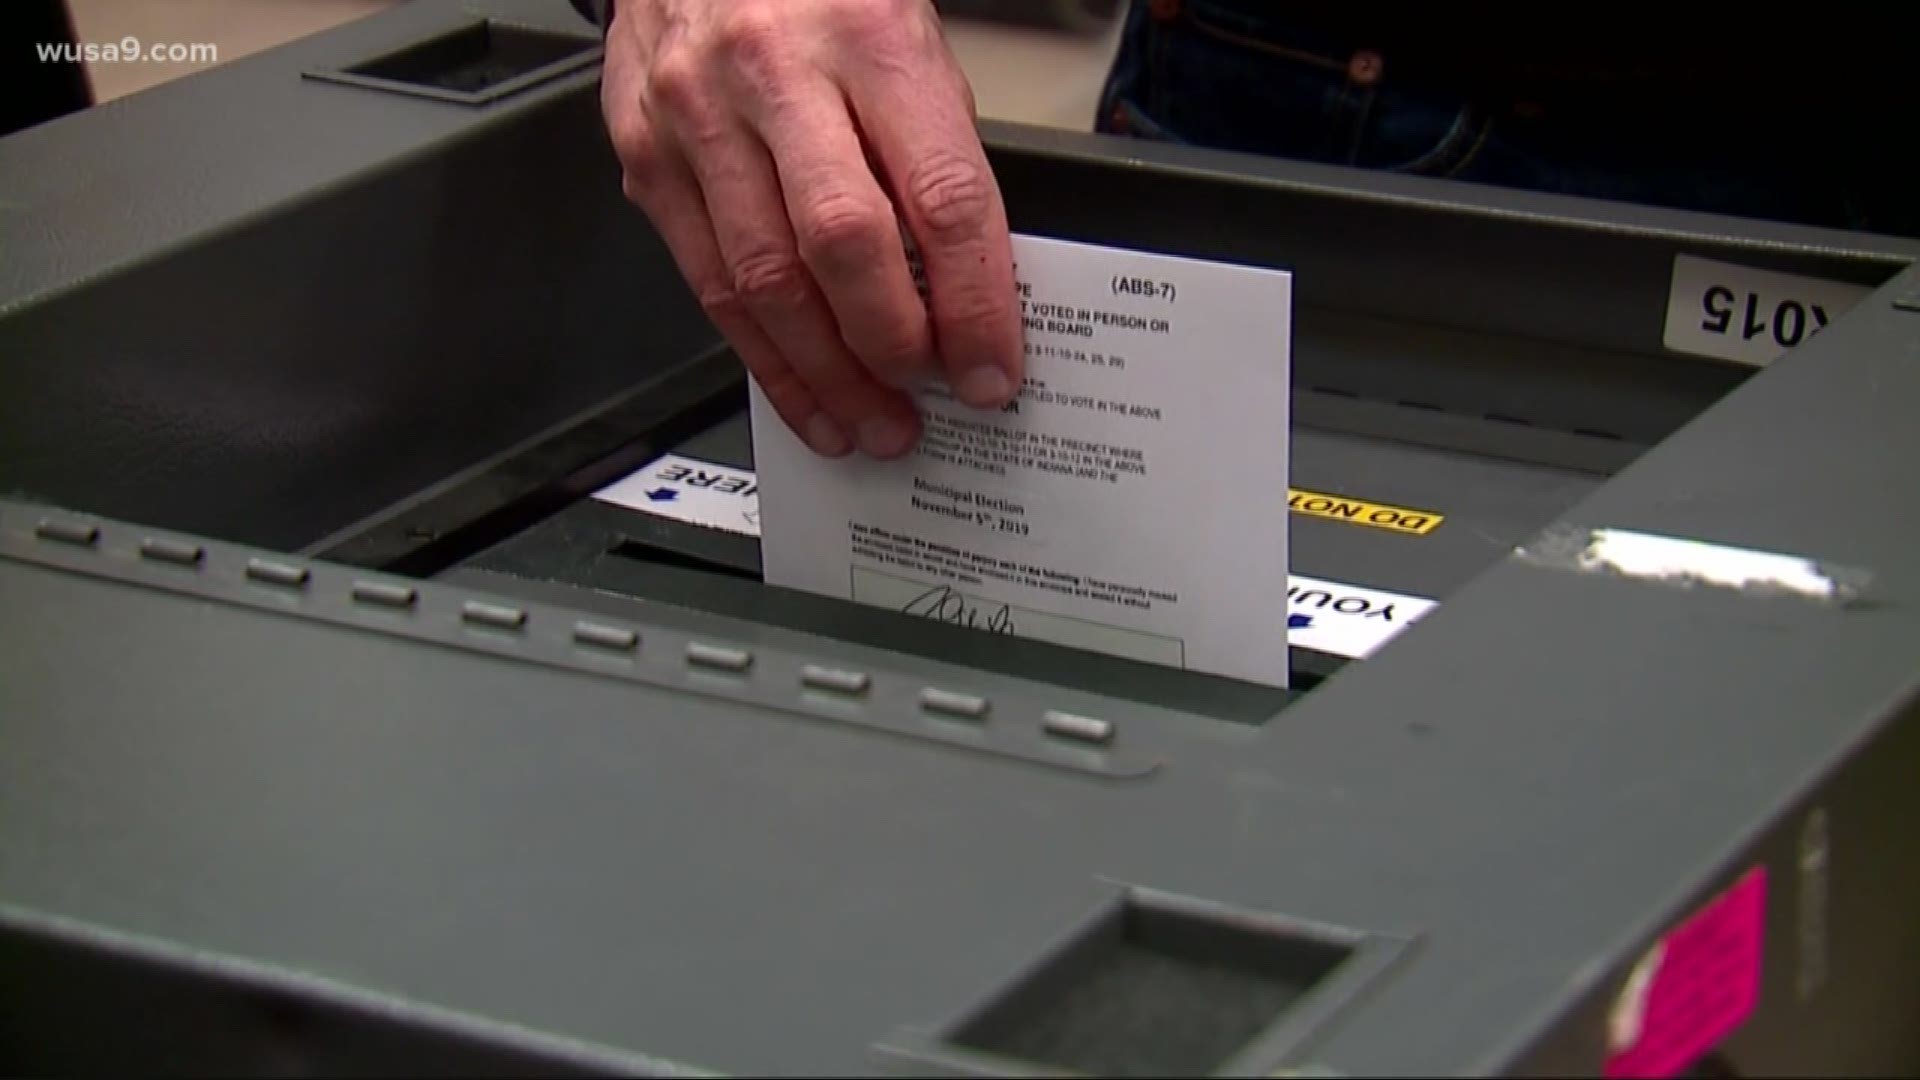 Virginia Department of Elections confirmed that six precincts in Stafford were given the wrong ballots, and that they're investigating what happened.